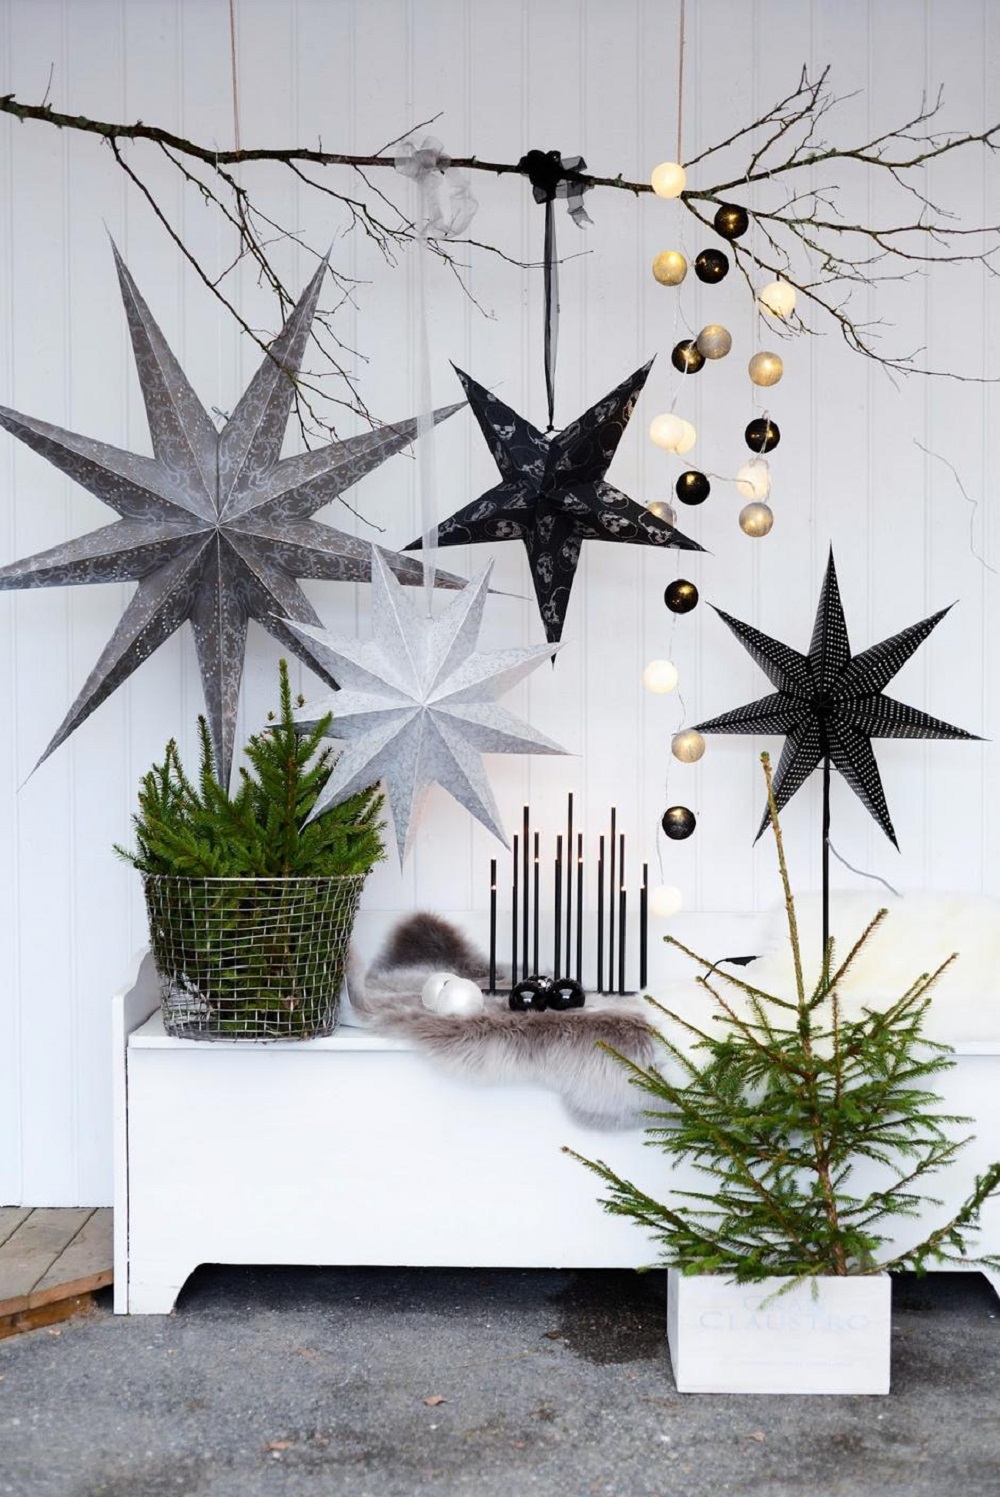 t4 Modern Christmas decorations ideas that are heartwarming